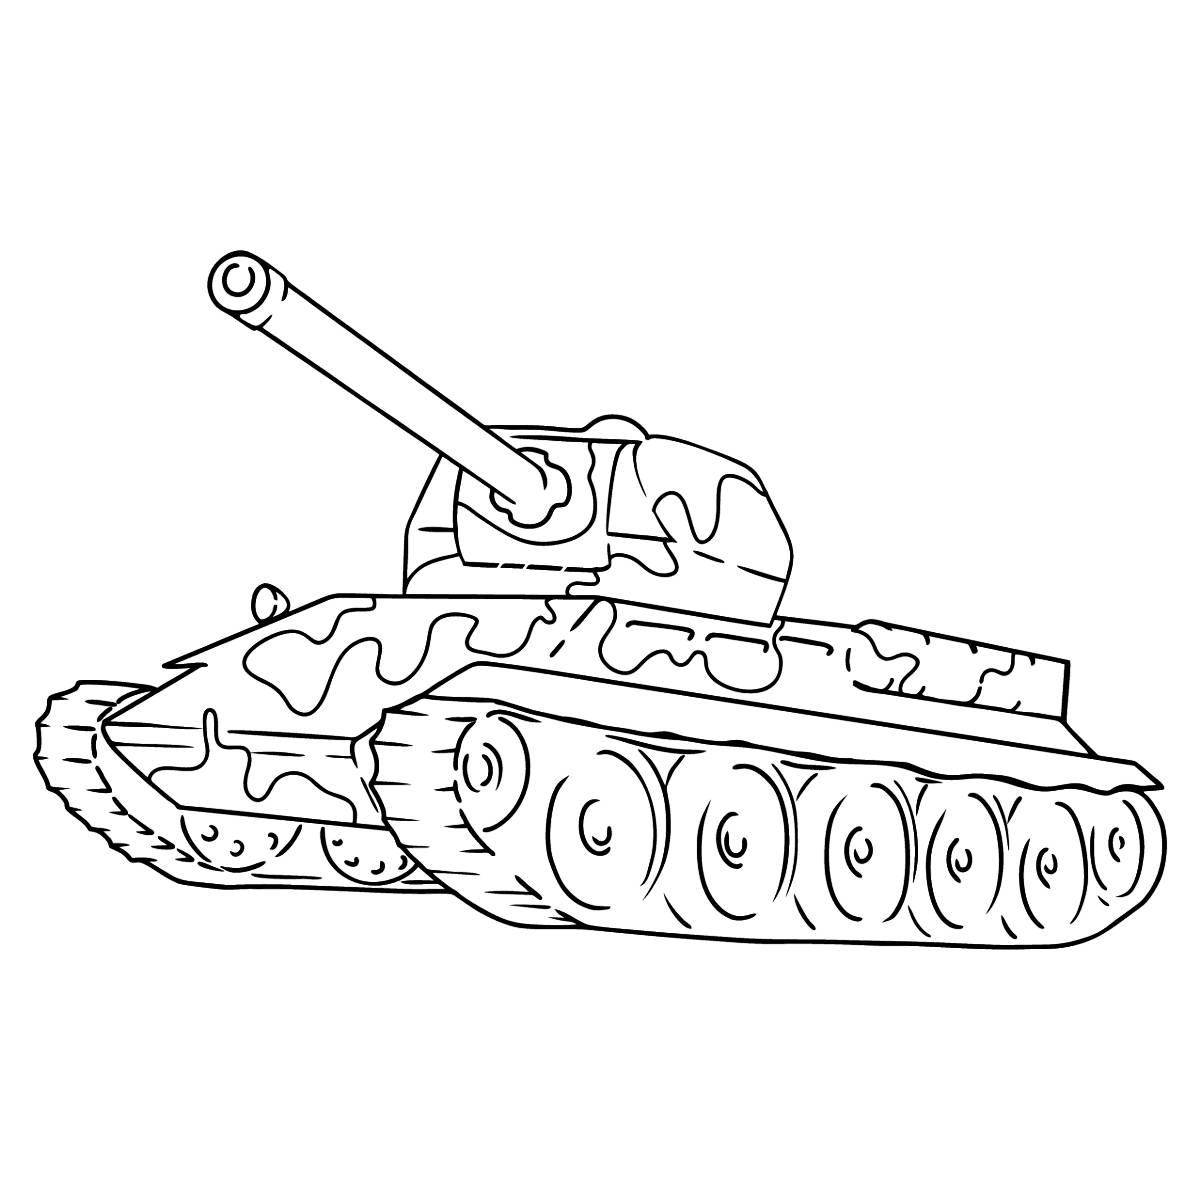 Bright coloring t34 tank for kids